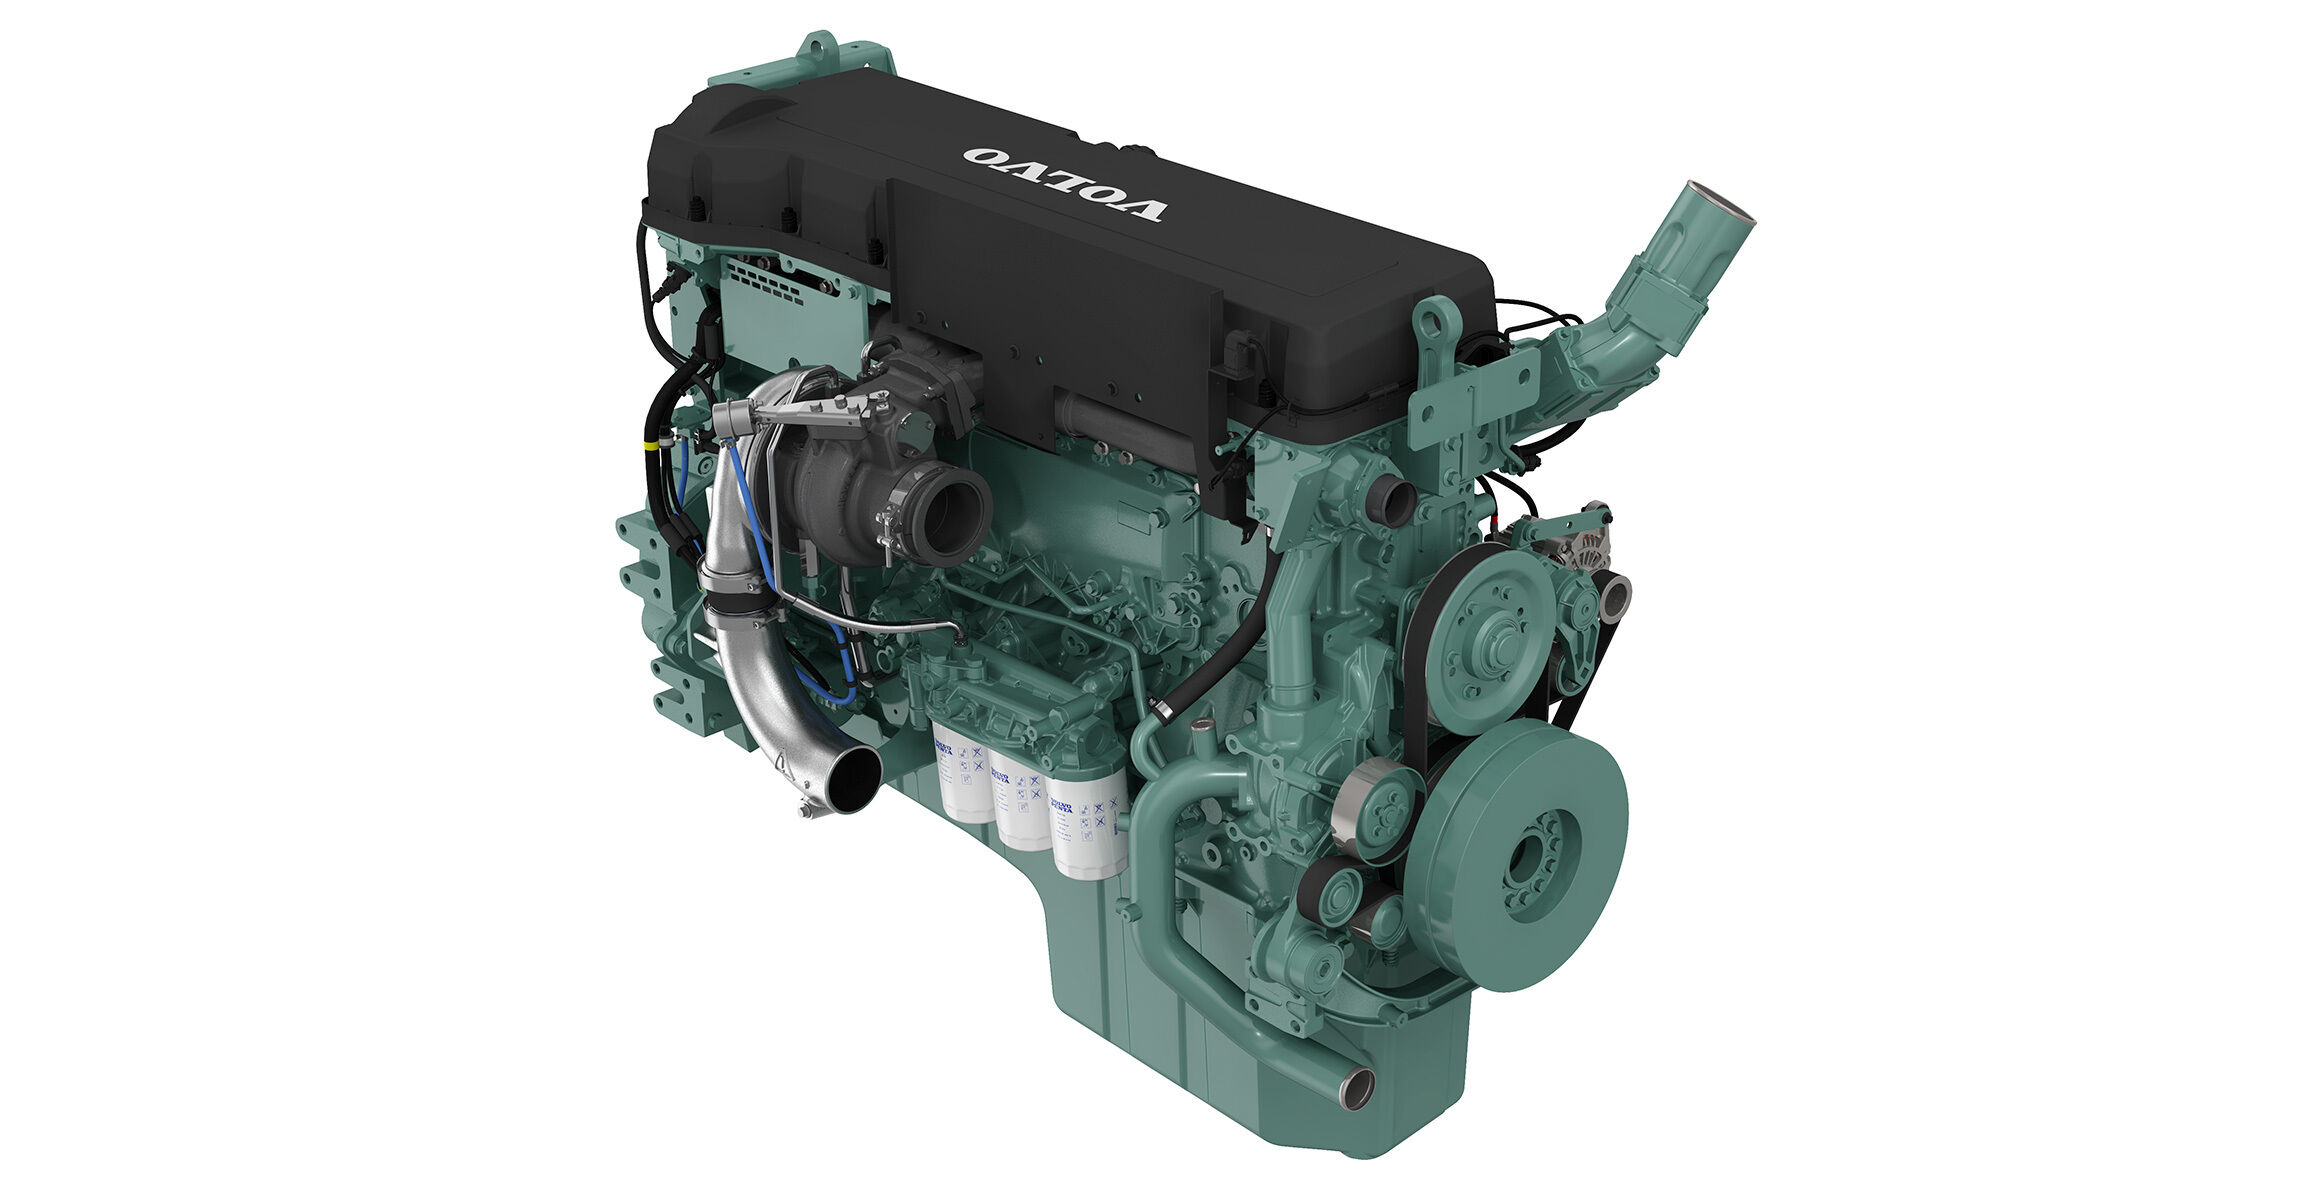 Volvo Penta launches a new 16-liter engine for mobile versatile  applications